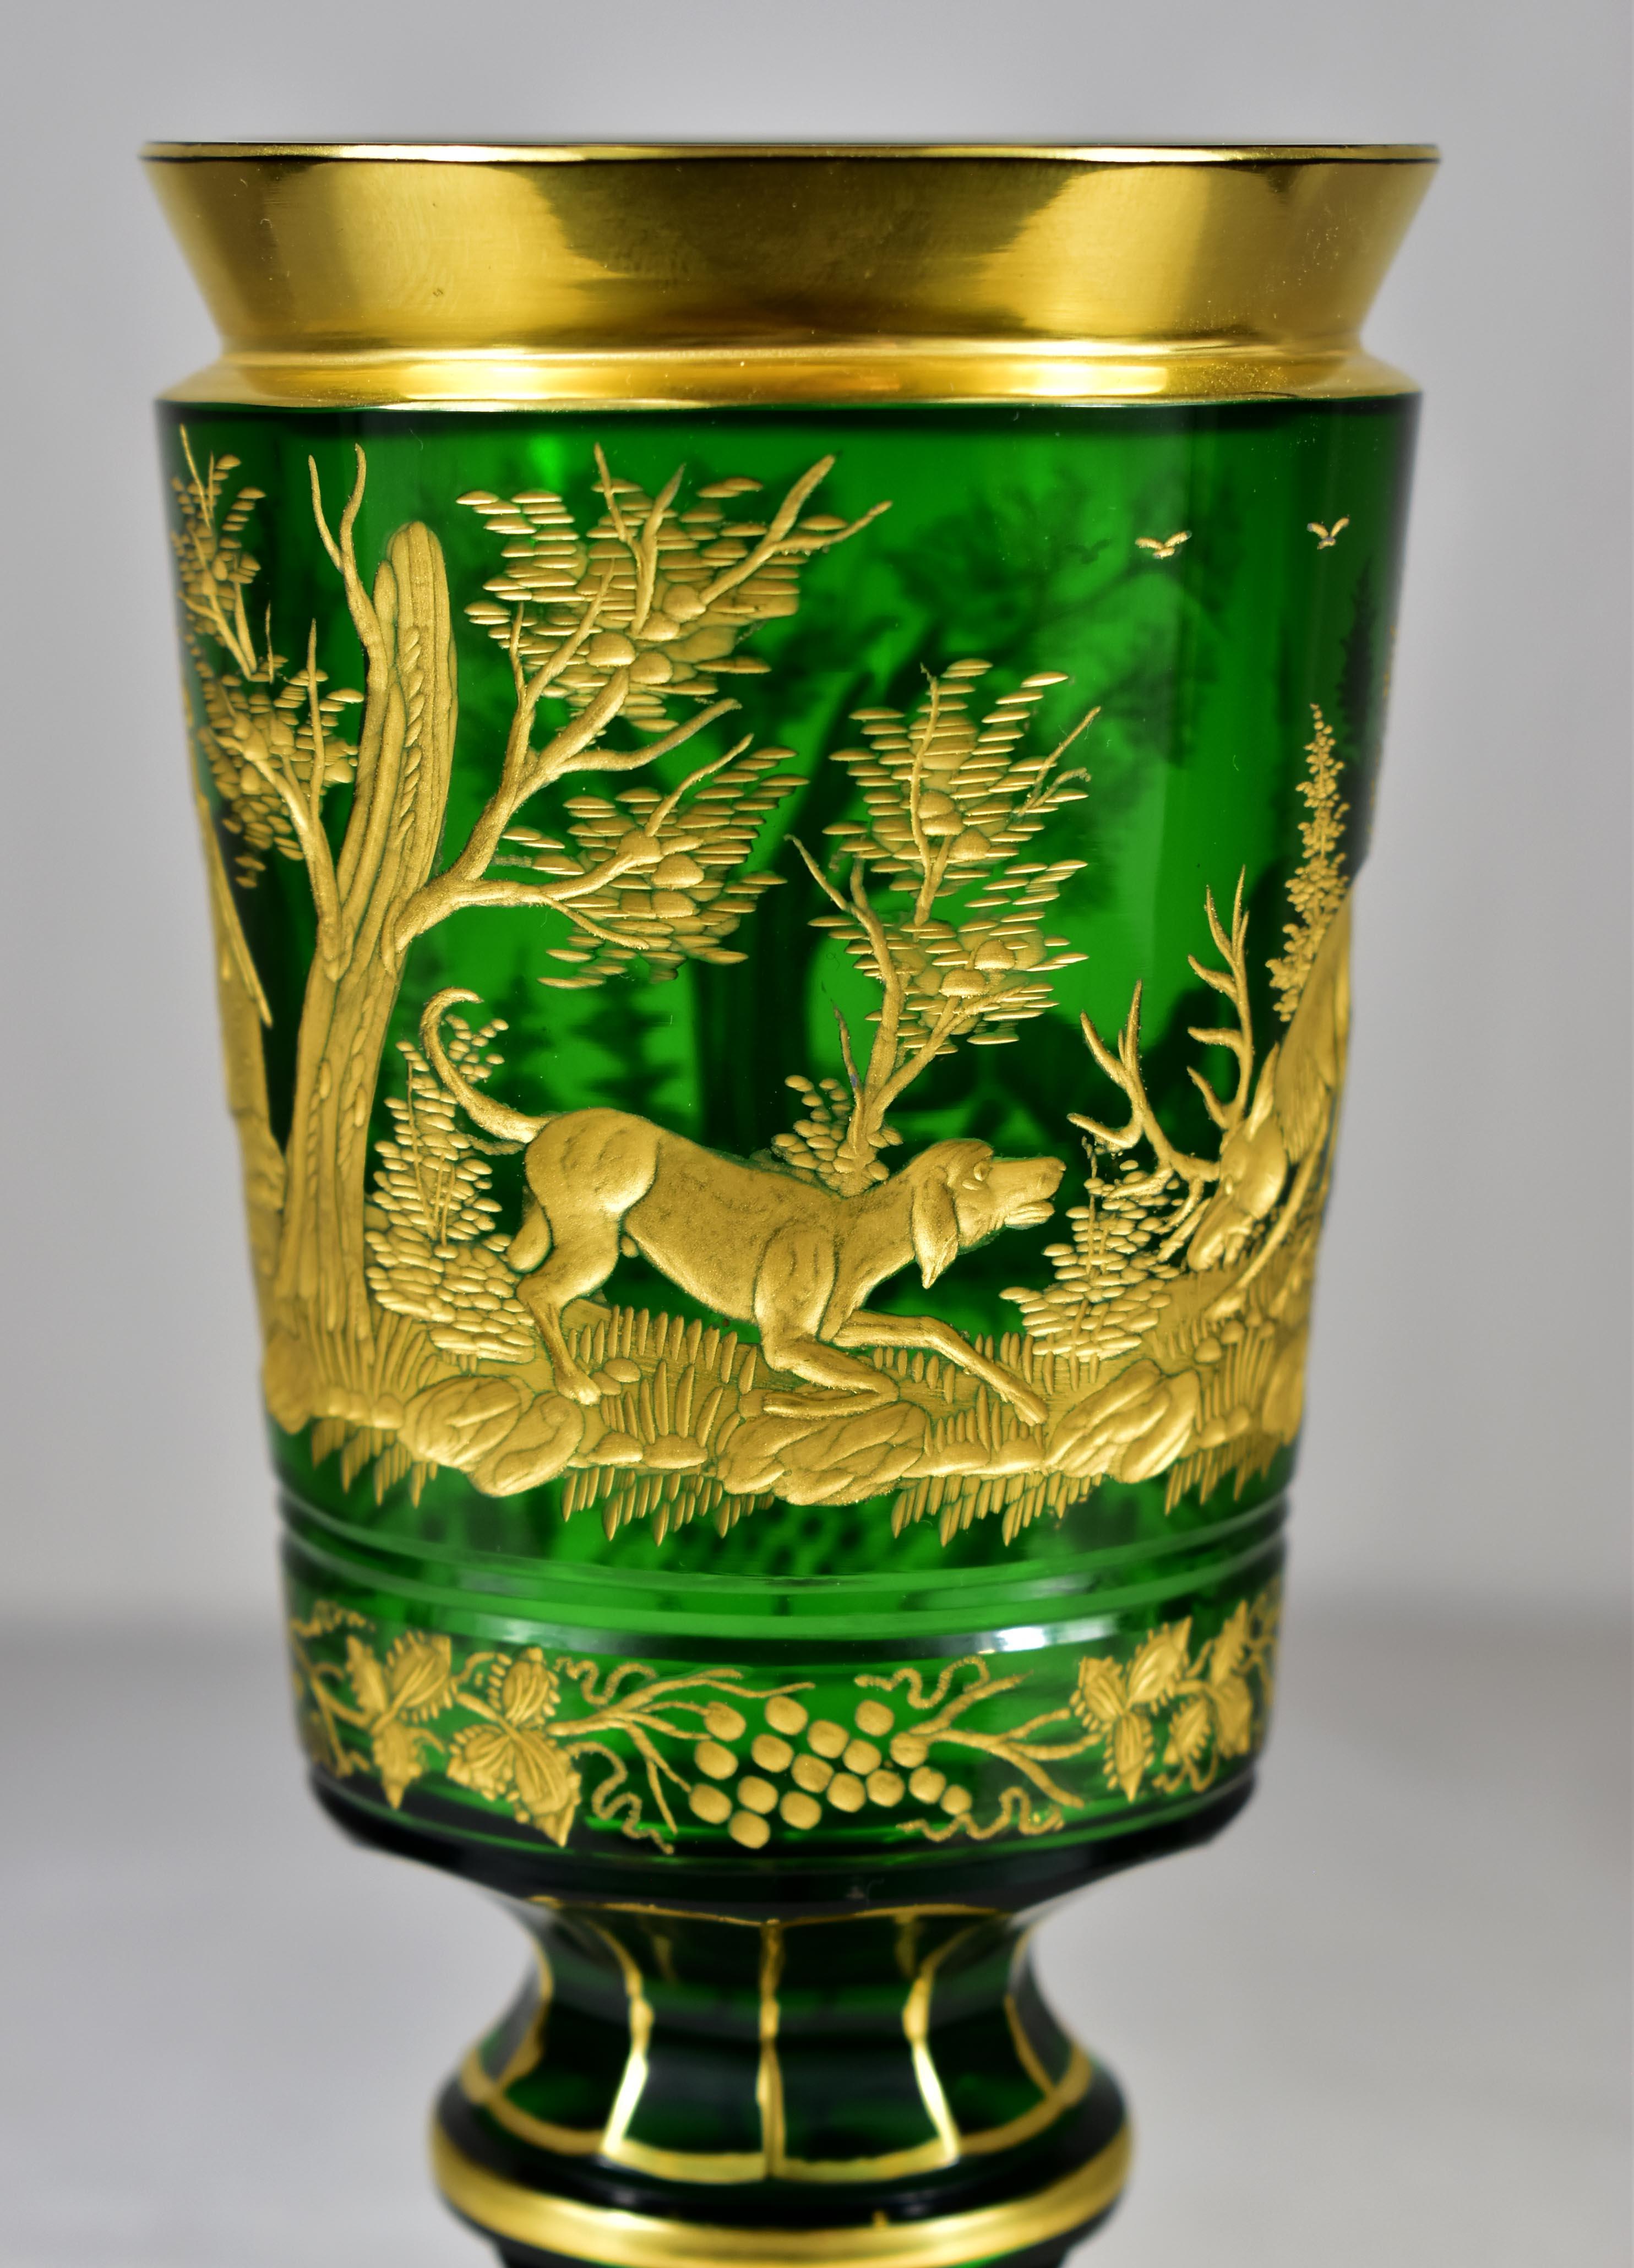 Late 19th Century Goblet - Green Glass – Cut- Engraved and Gilded- Bohemian Glass-19-20th century